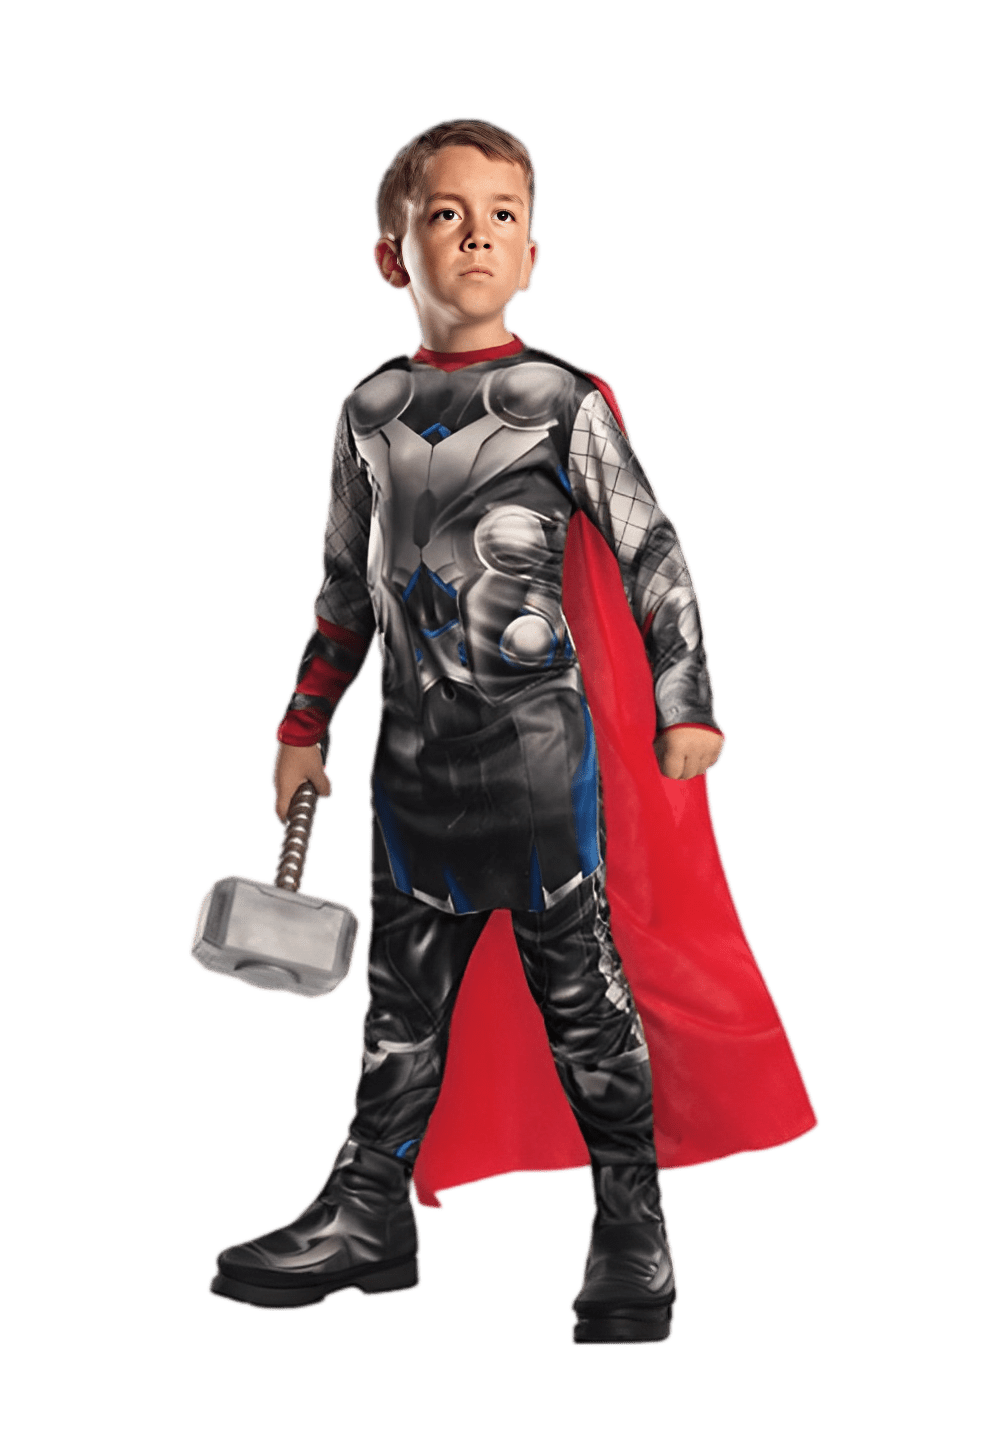 Marvel Age of Ultron Child's Thor Costume